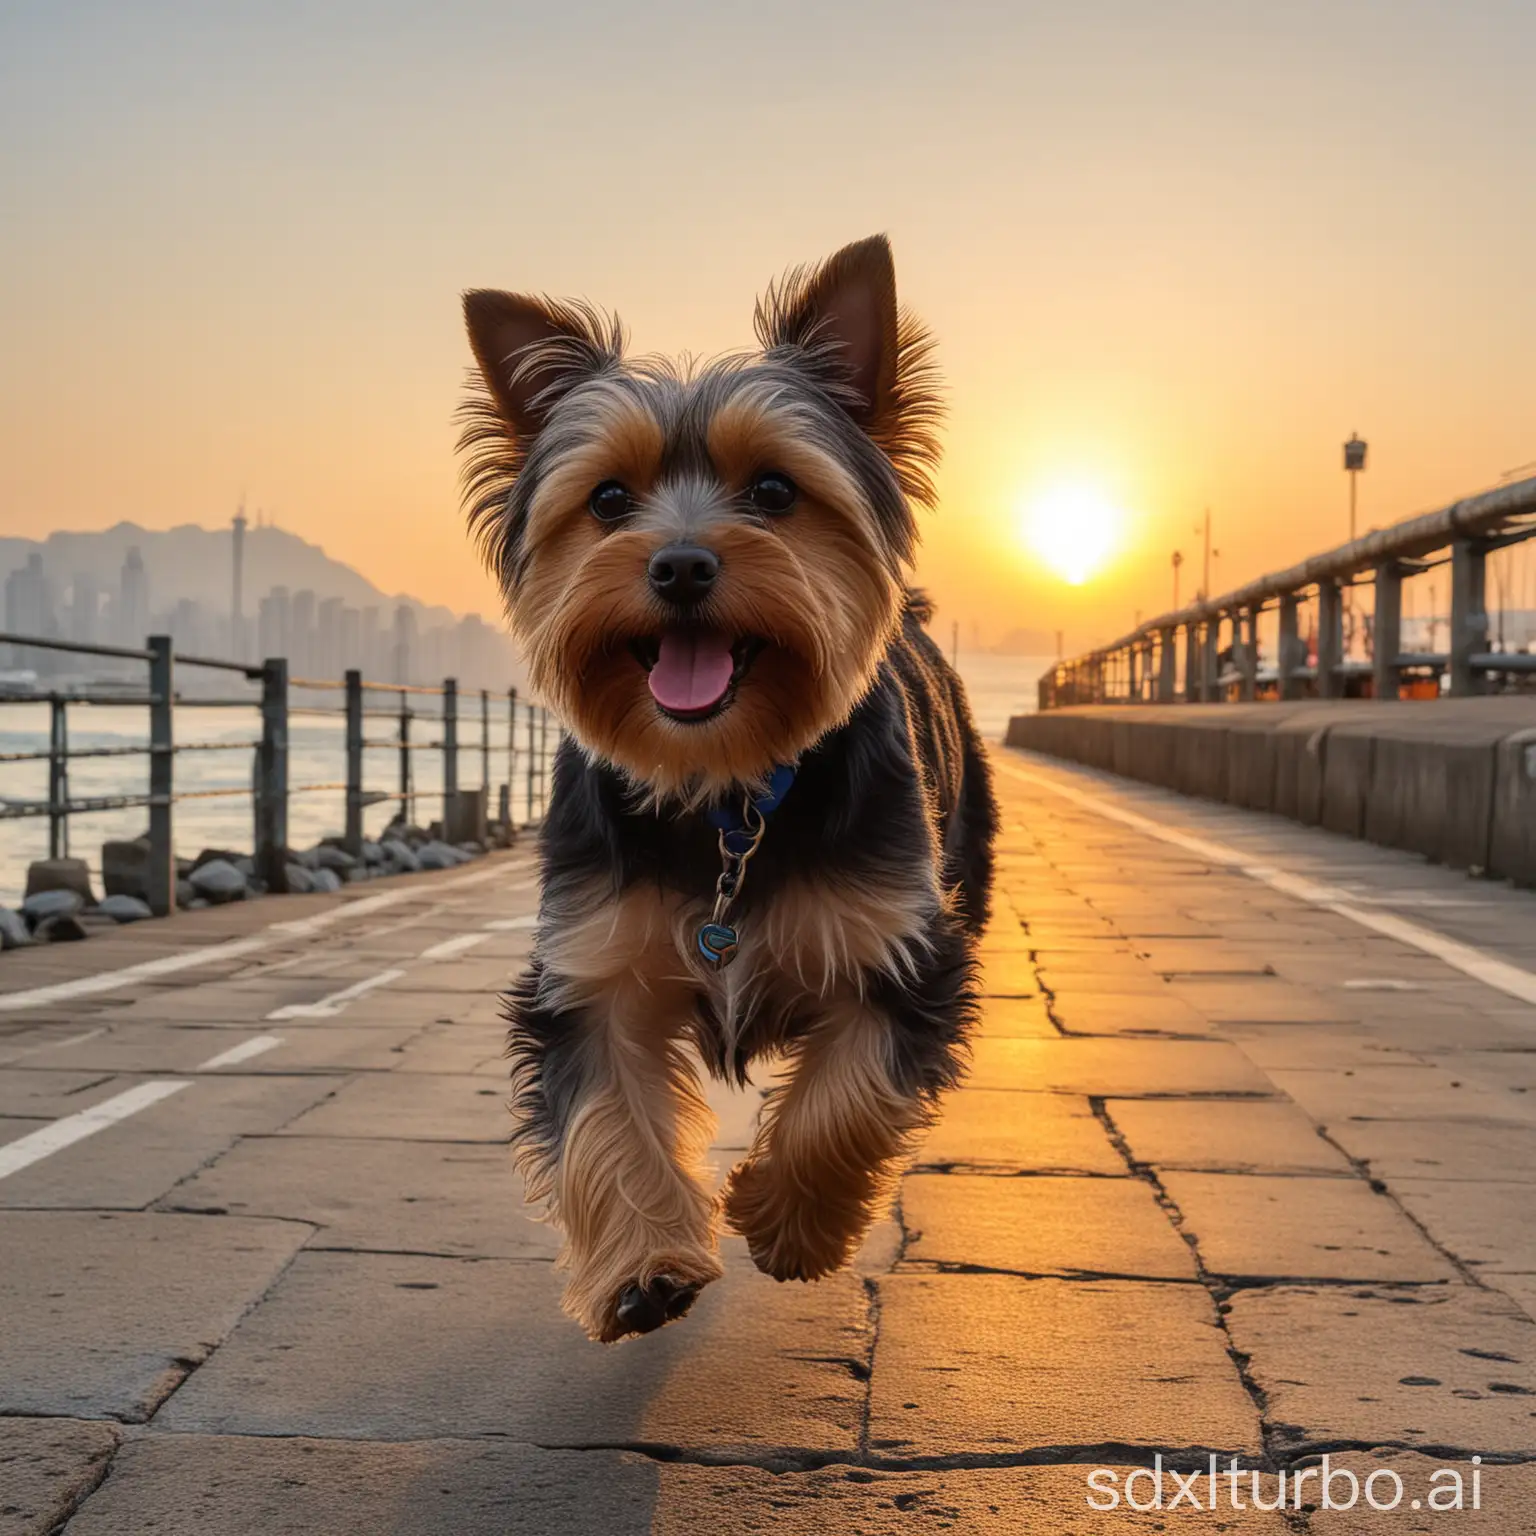 Yorkshire terrier run in Tamsui at Taiwan, the sunrise at the background